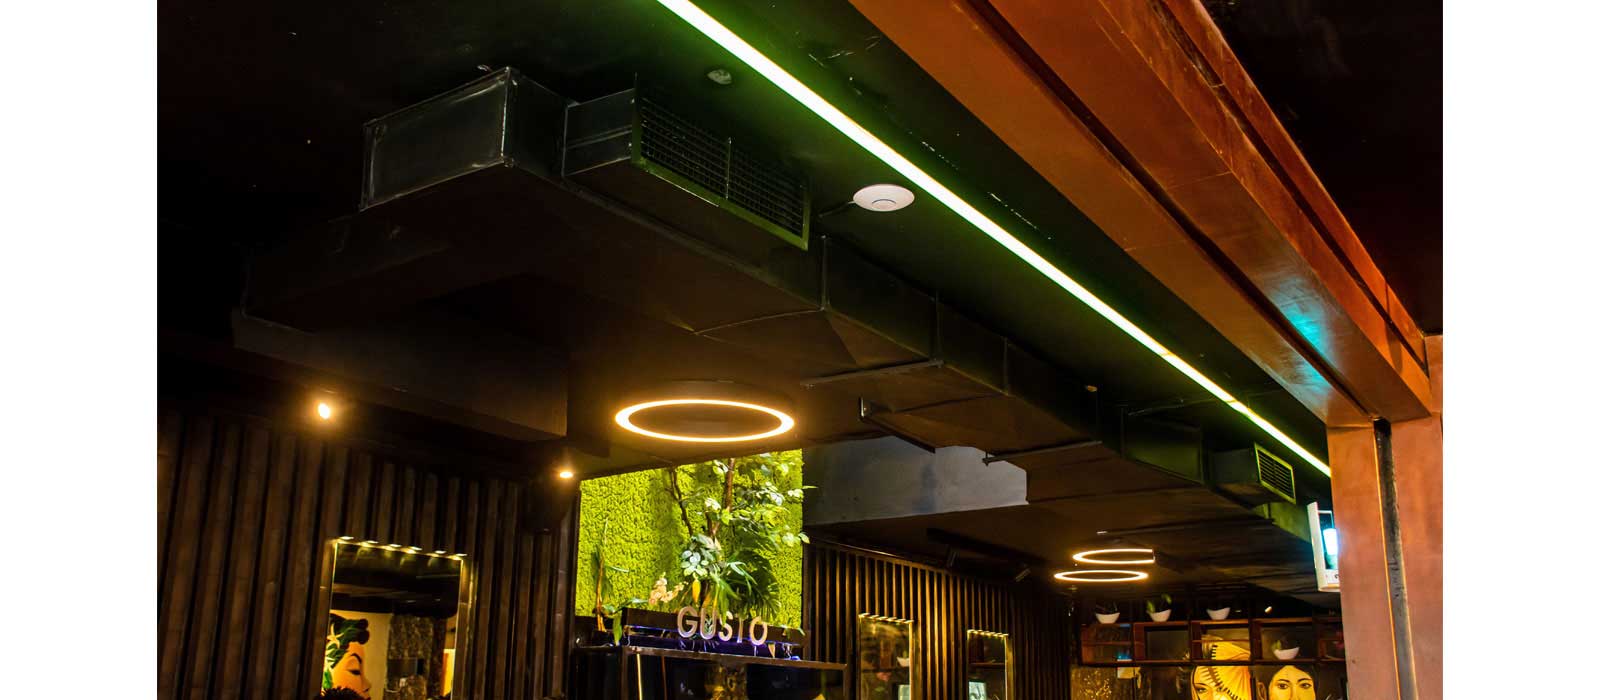 Enhancing Dining Comfort at Gusto Restaurant with LG Air Conditioning Solutions